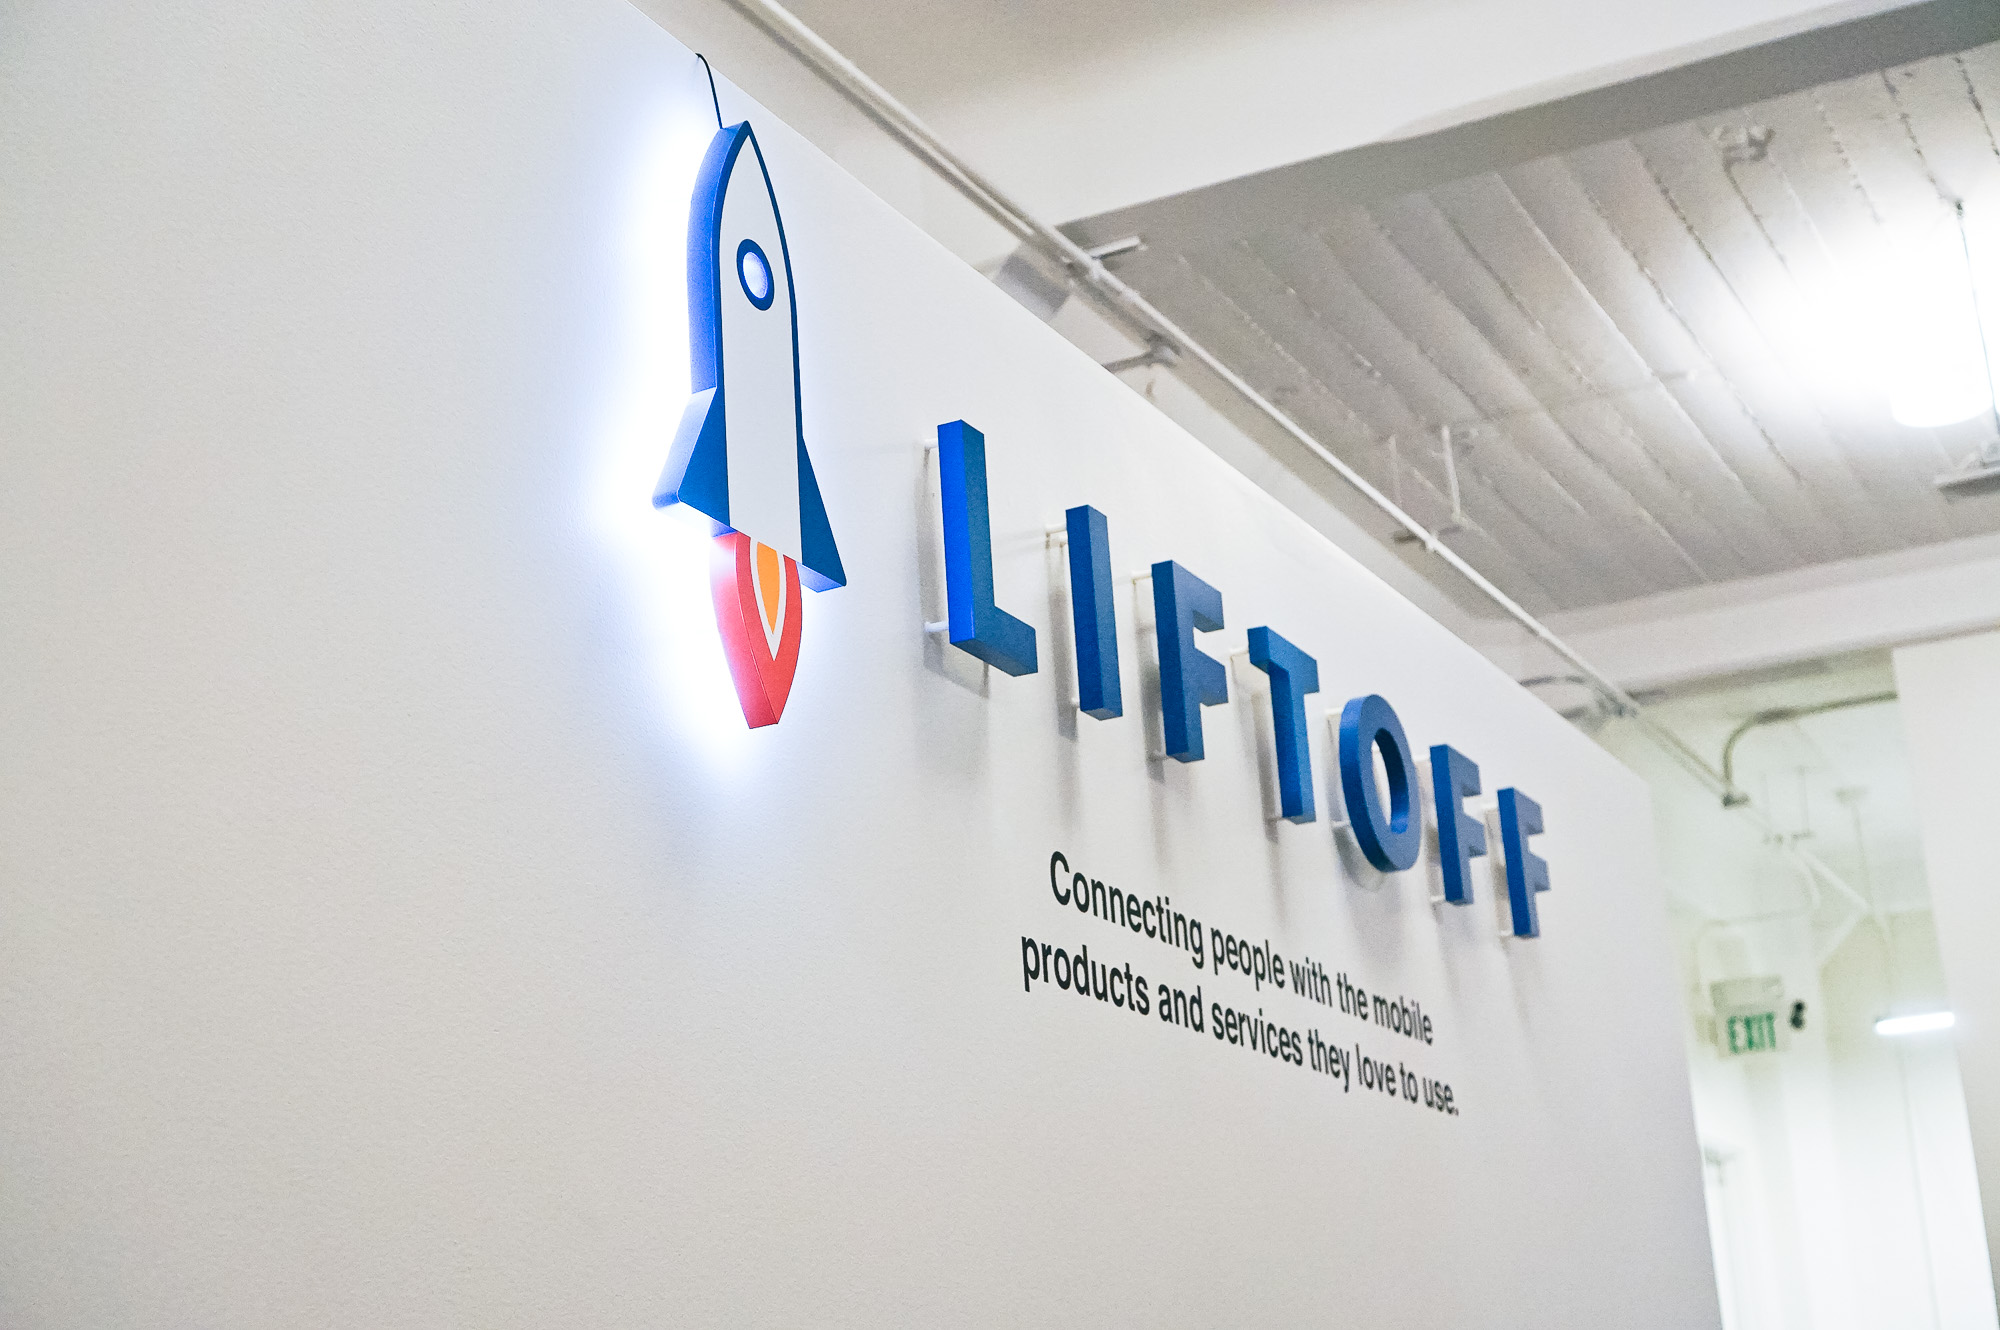 Illuminated rocket logo sign for Liftoff, a company that creates a mobile app optimization marketing platform. Office designed by Knotel, an office space rental agency.